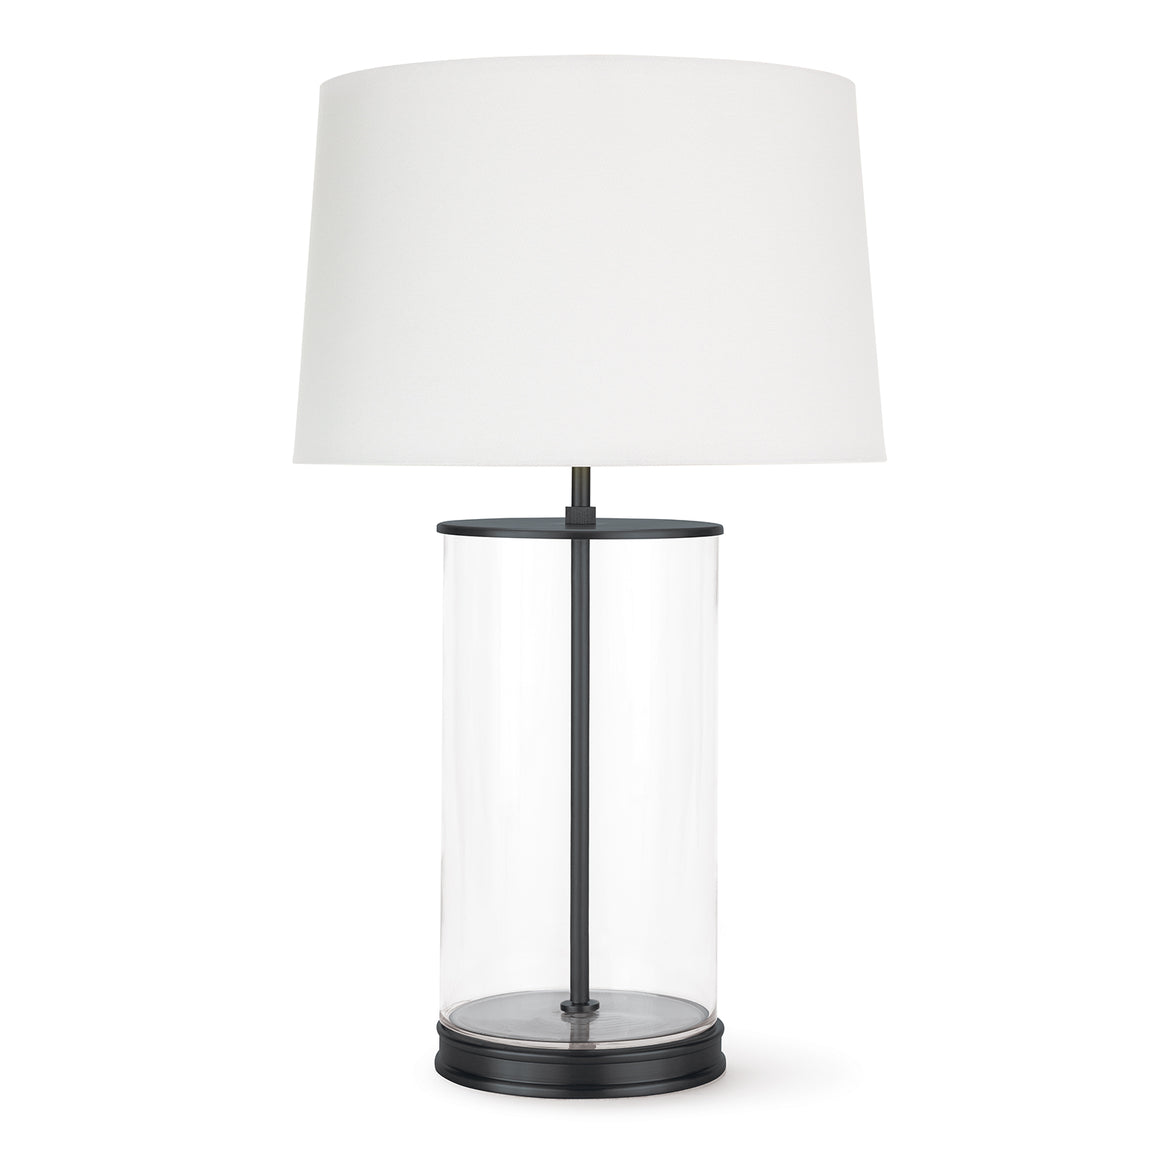 Magelian Glass Table Lamp (Oil Rubbed Bronze)